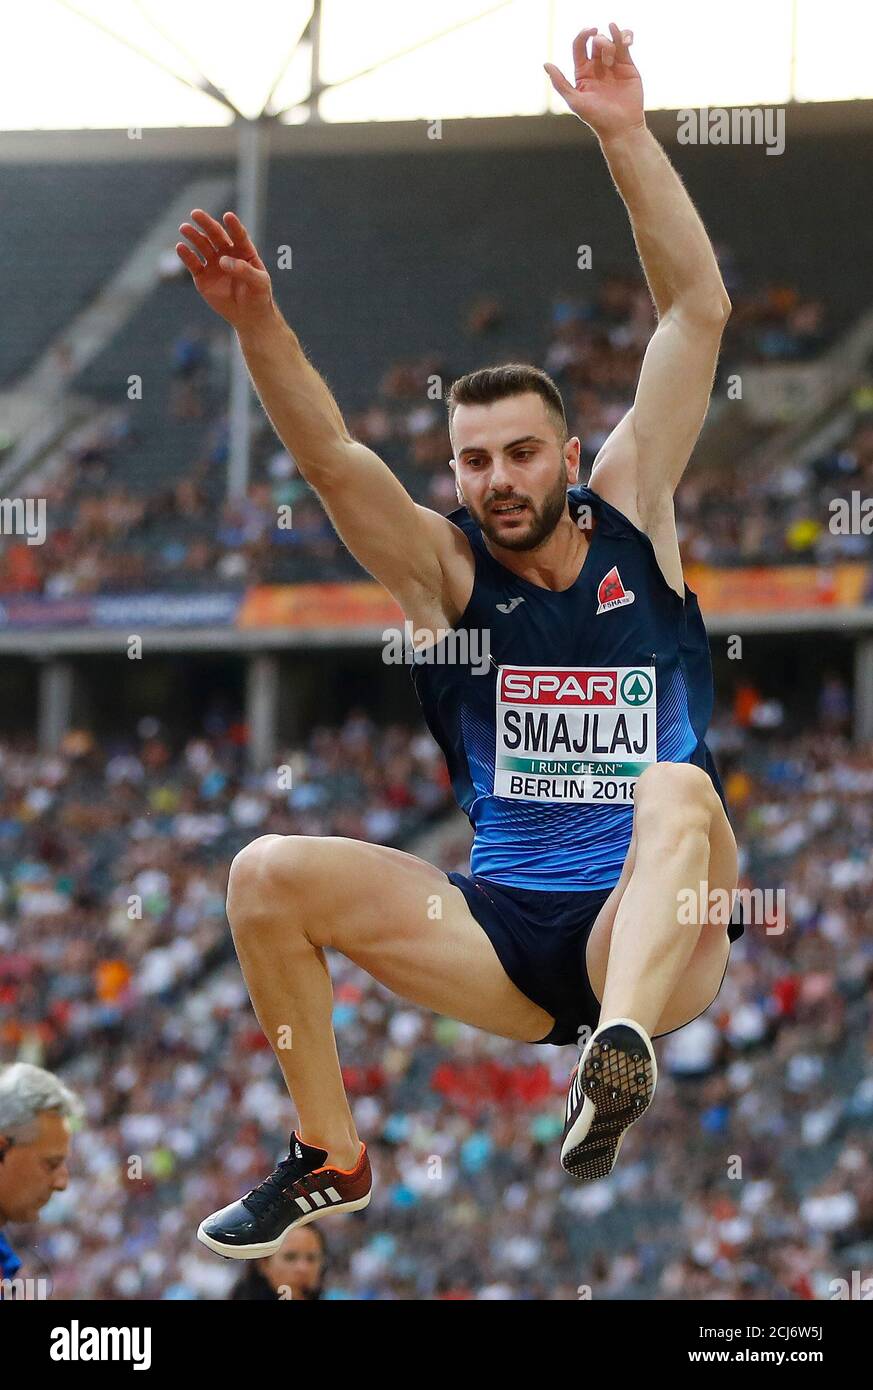 Albania Athletics High Resolution Stock Photography and Images - Alamy